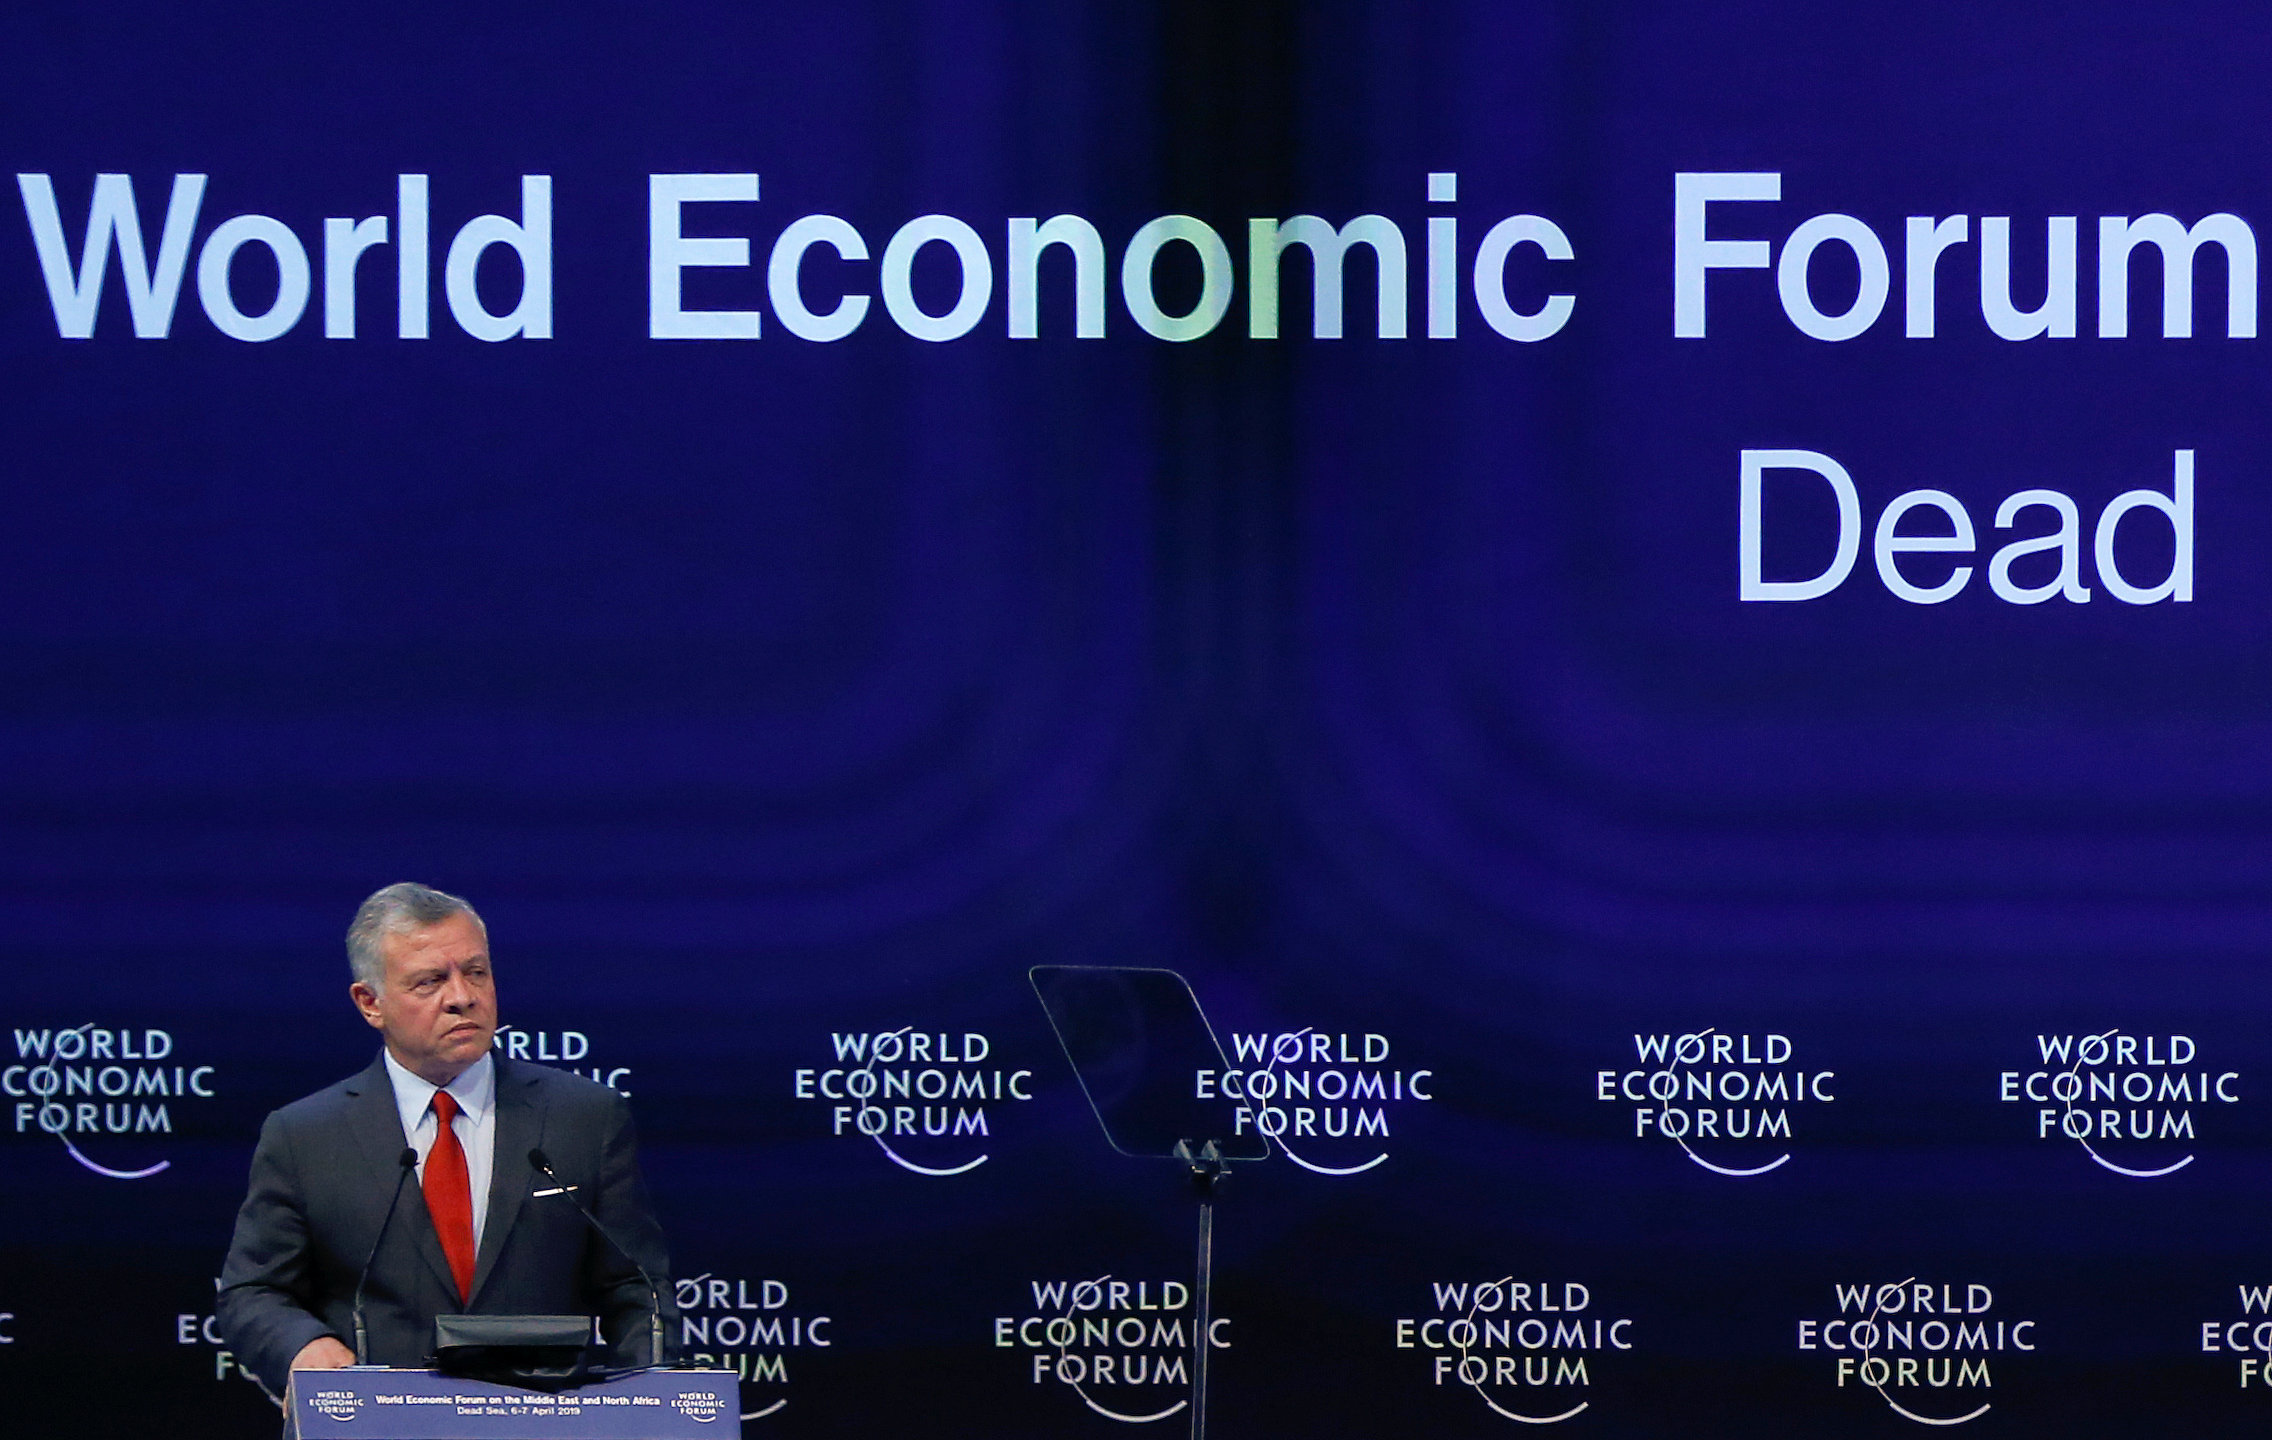 World Economic Forum (WEF) on the Middle East and North Africa at the Dead Sea